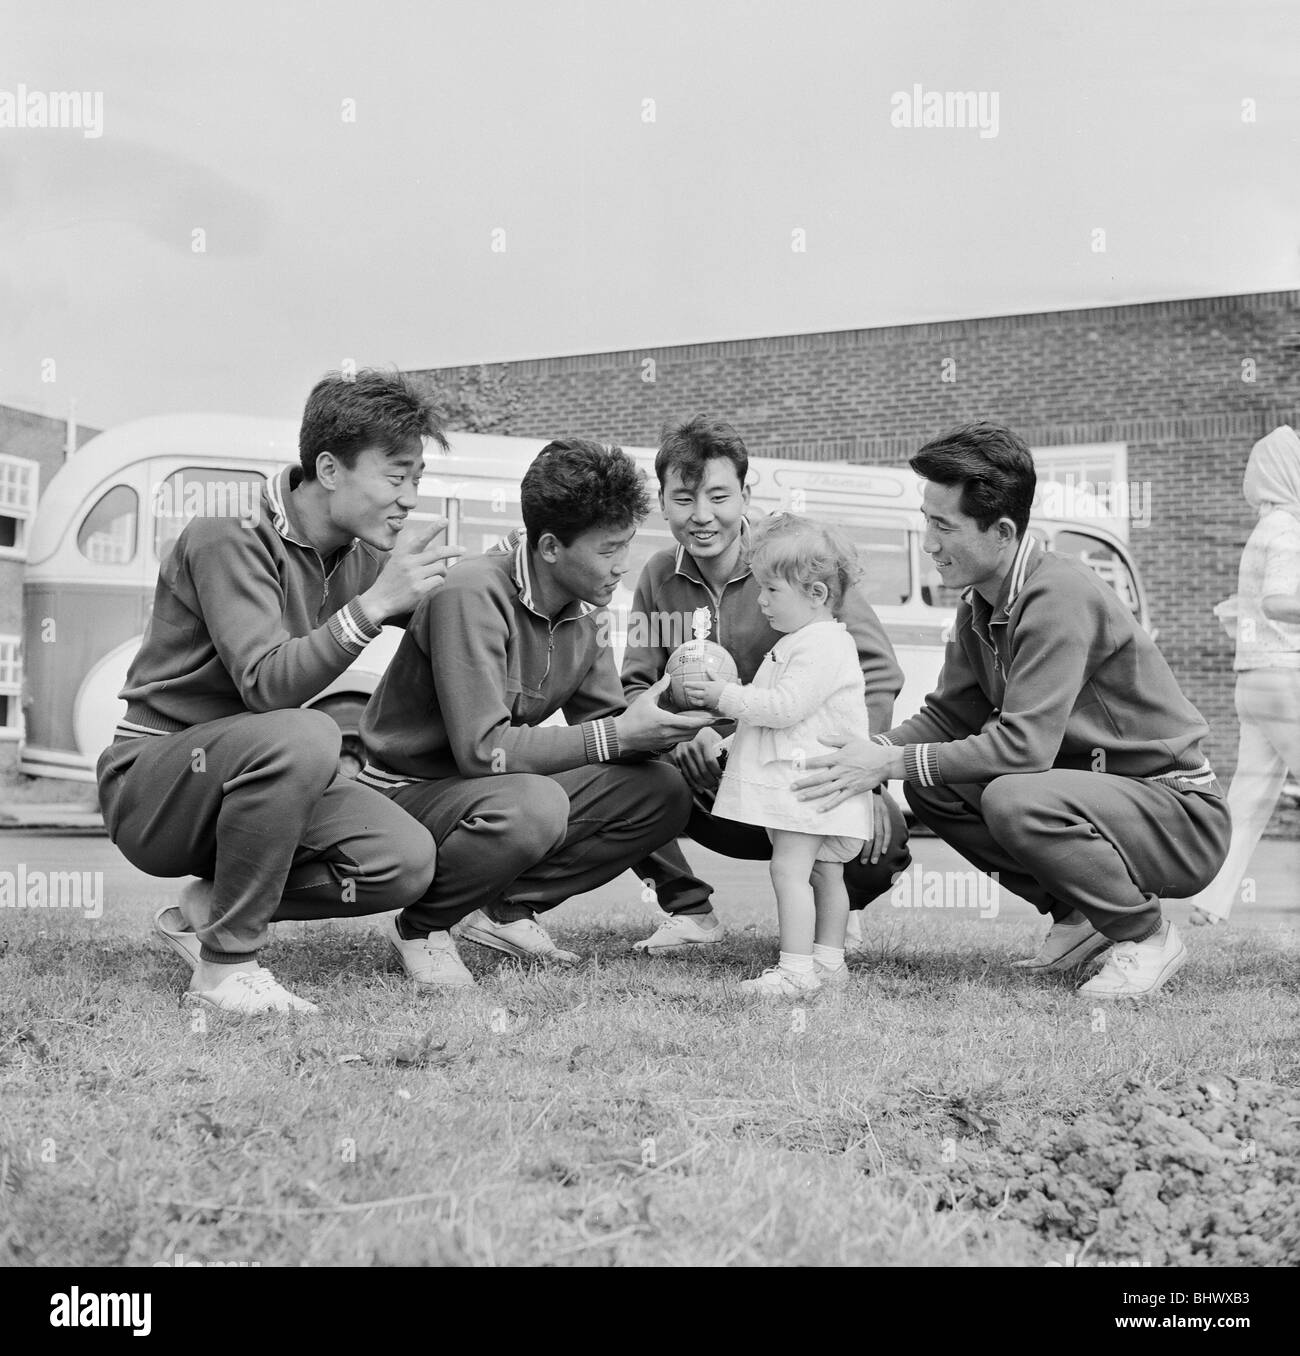 1966 World Cup Tournament in England. Young Elain Penman of Darlington presents a World Cup Willie tin of toffees for these North Korea footballers. They are left to right: Rim Joong sun, Li Chan Myung, Kim Yung Kil and kang Ryong Woon. 21st July 1966. Stock Photo